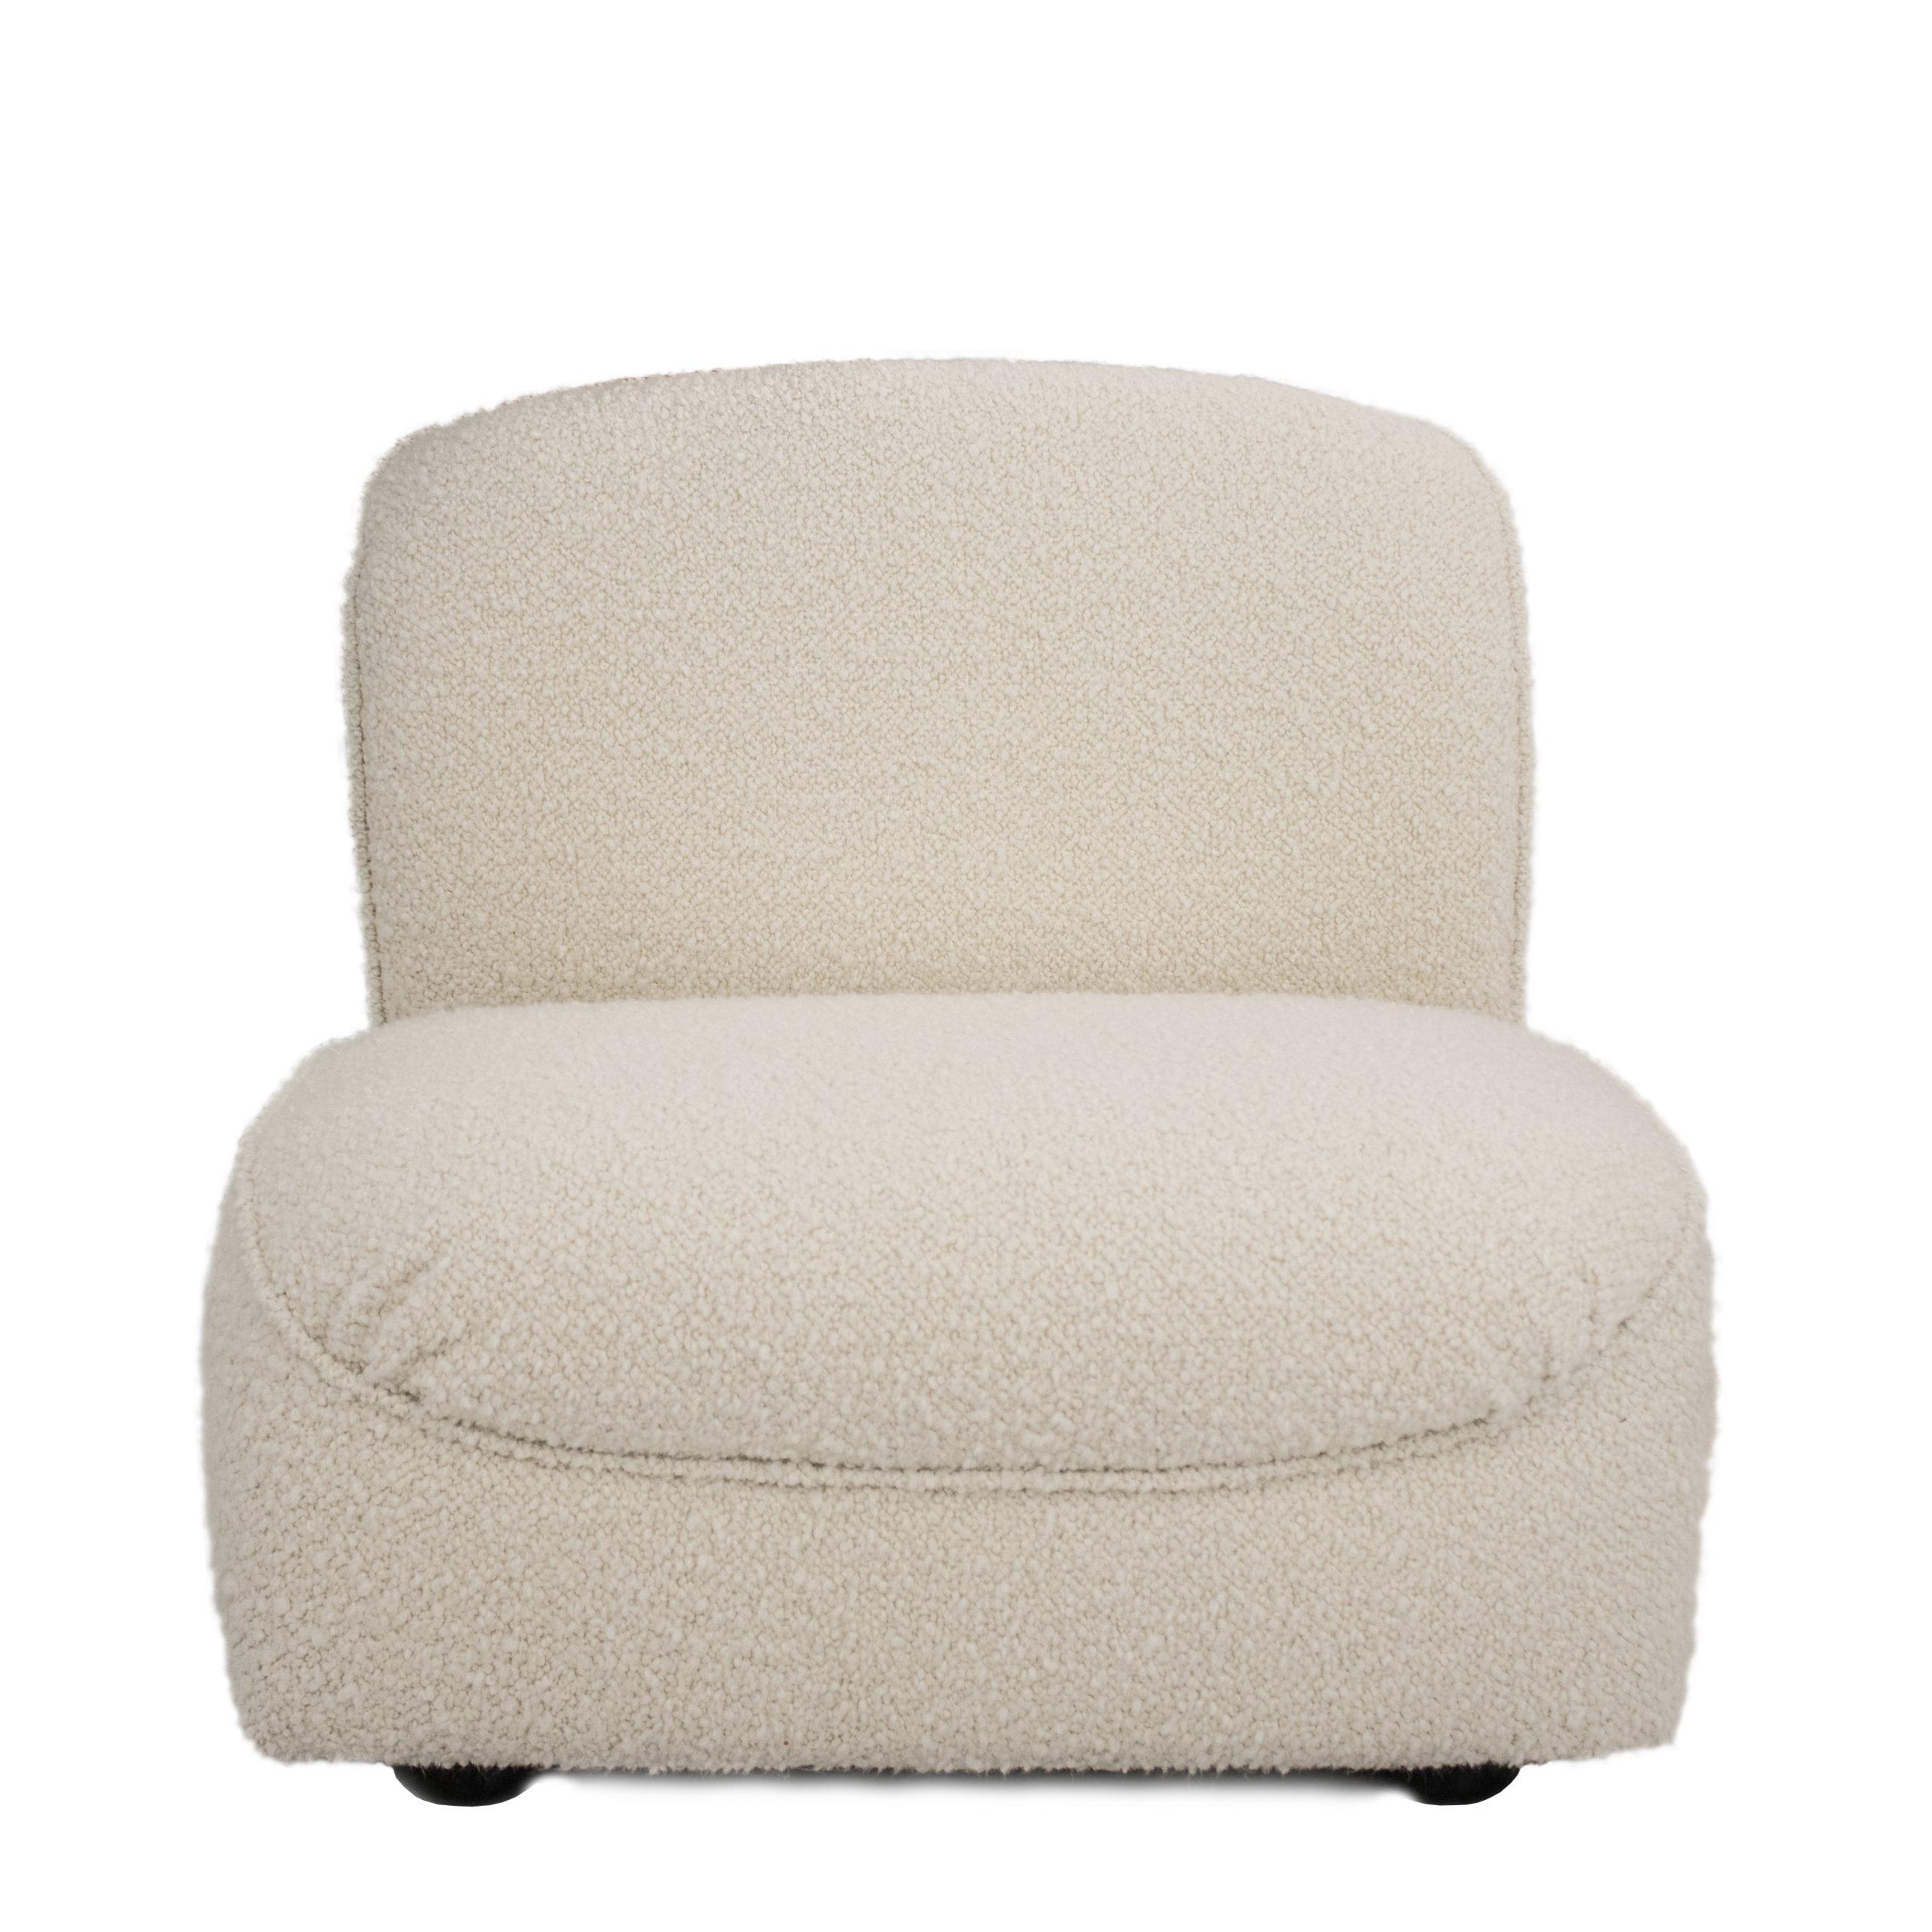 Modular armchair designed by Afra and Tobia Scarpa for Cassina in 1968 in Italy. it is made on a solid wood structure covered in foam and upholstered by hand in a beige bouclé. It is a comfortable and versatile modular design that can be used